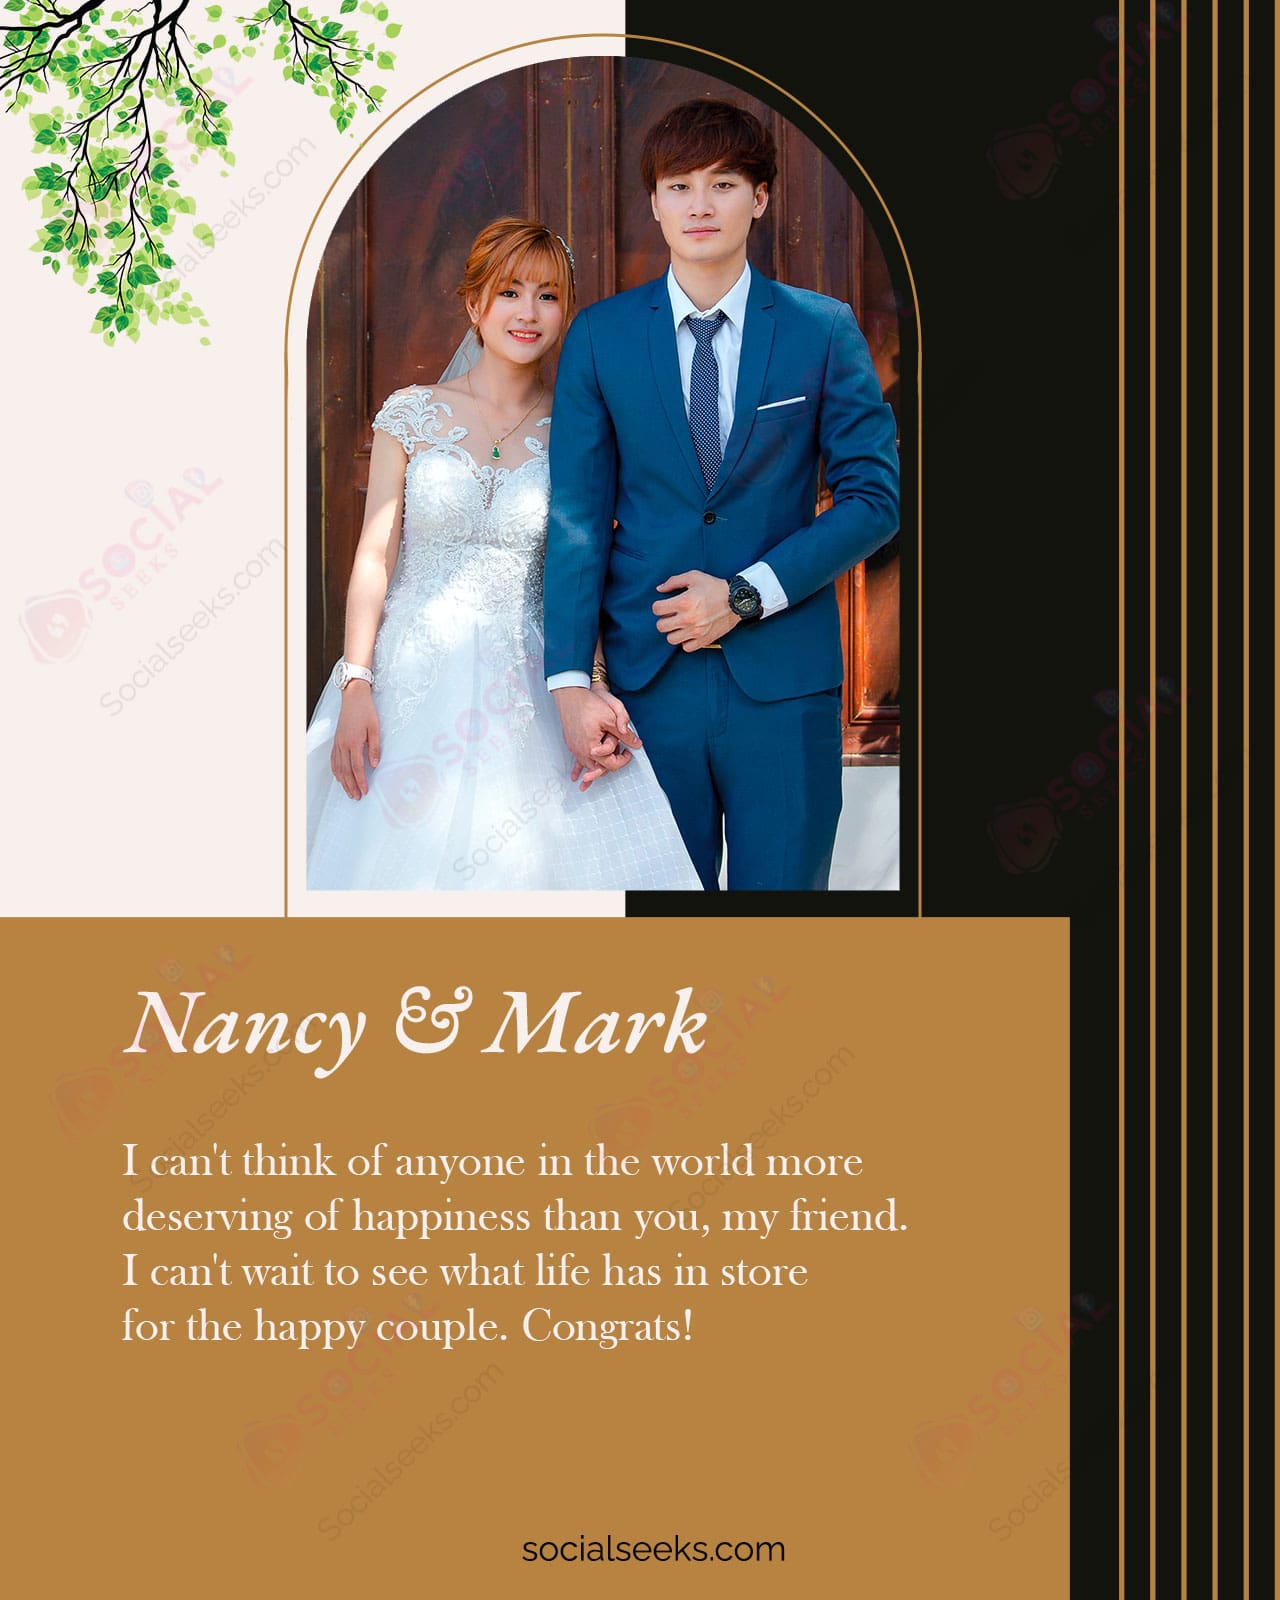 Customized Happy Wedding Photo Frame Wishes Greeting Card With Name